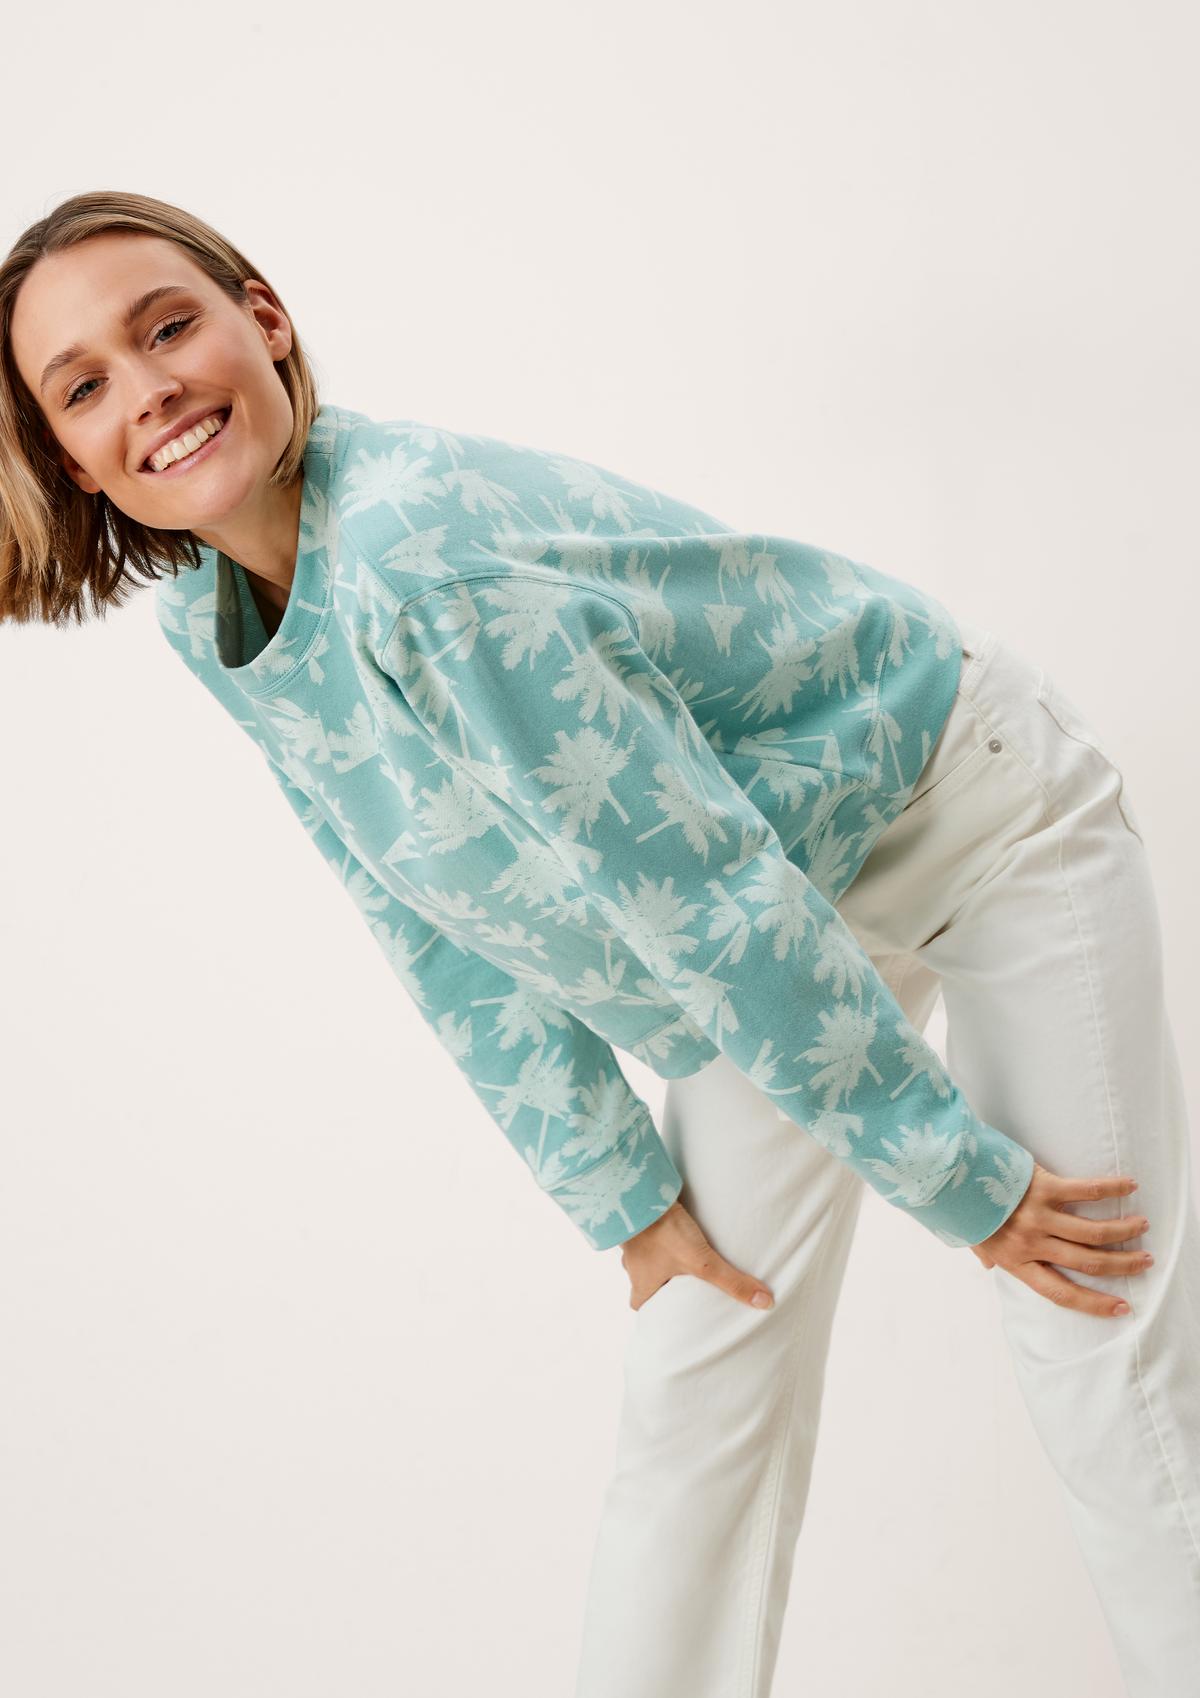 s.Oliver Sweatshirt with a stylish all-over print